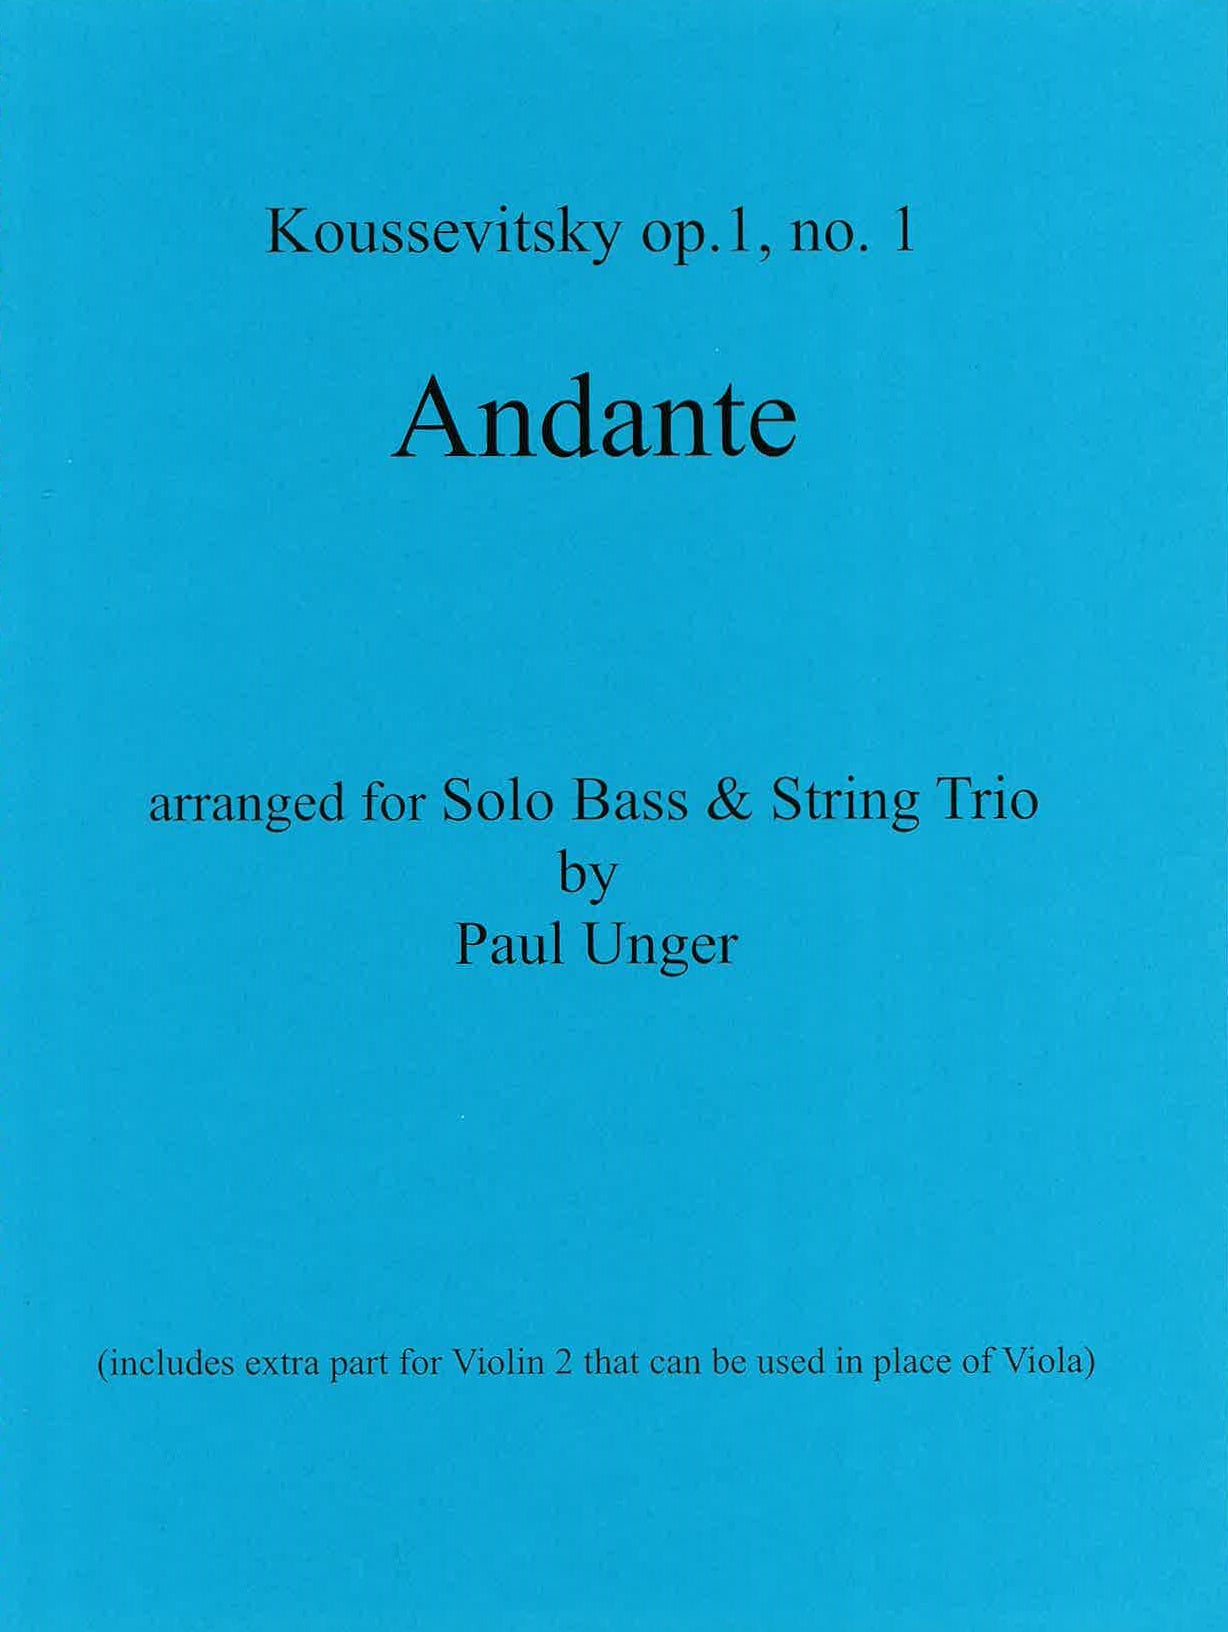 Koussevitzky: Andante op. 1, no. 1 Arranged by Paul Unger for Solo Bass & String Trio